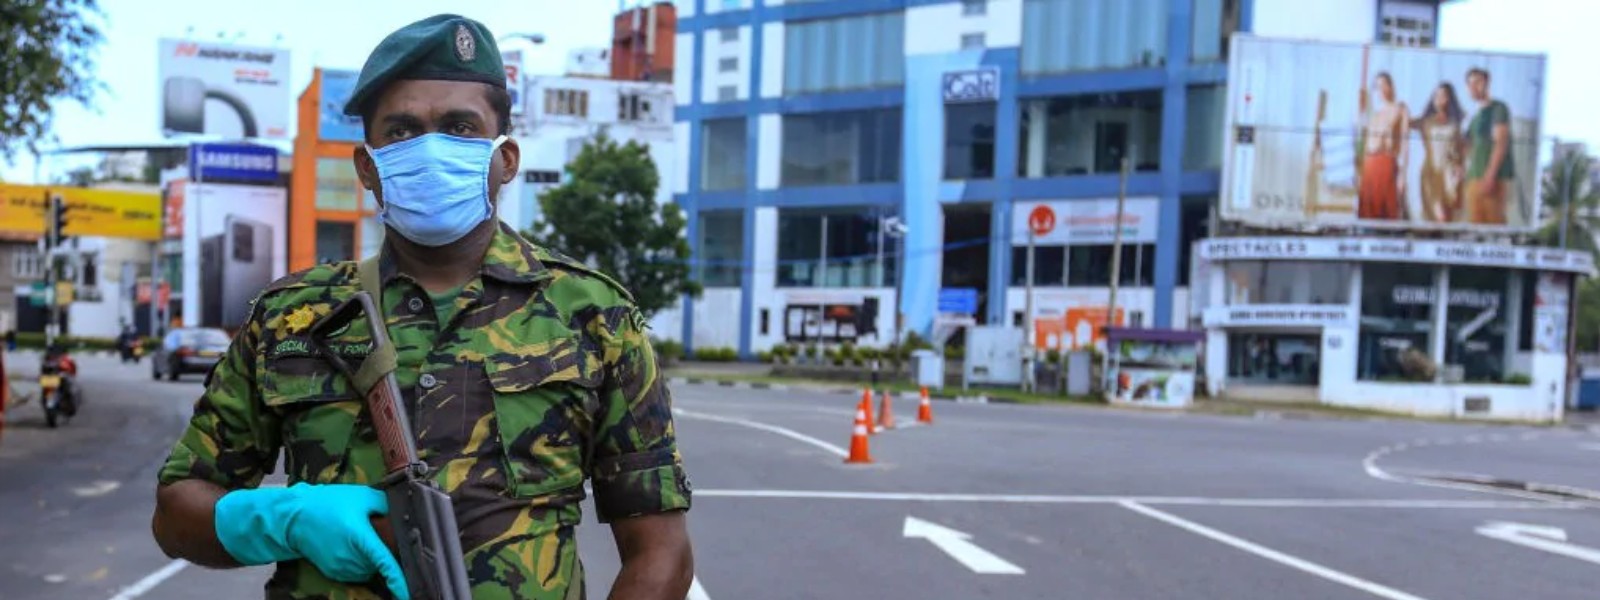 Curfew in Colombo to be lifted after 2 months: Island-wide curfew from 10 pm to 4 am.